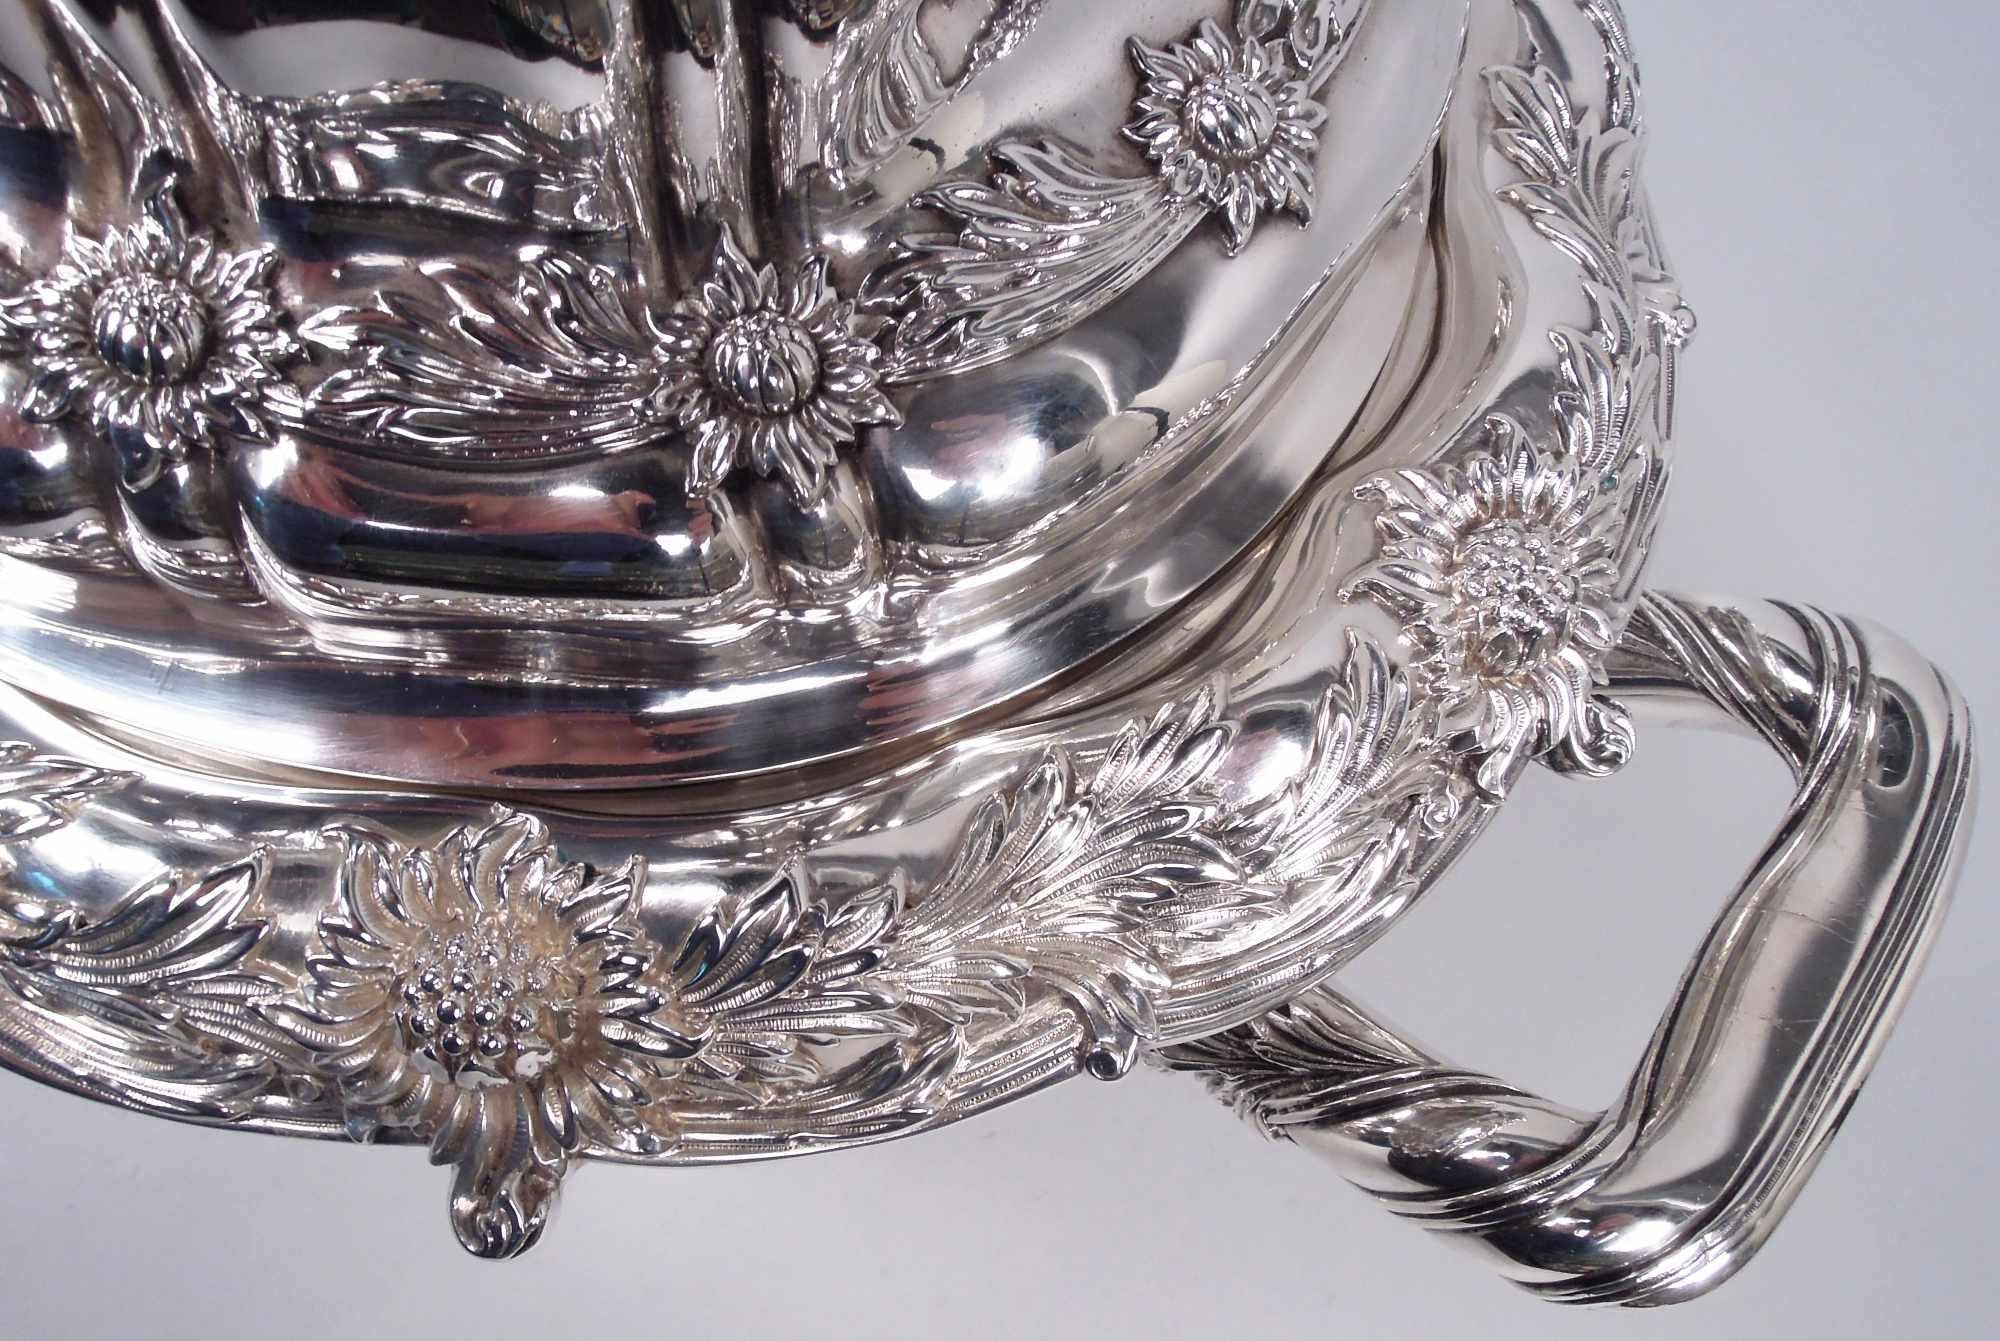 Rare Tiffany Sterling Silver Soup Tureen in Historic Chrysanthemum Pattern For Sale 2